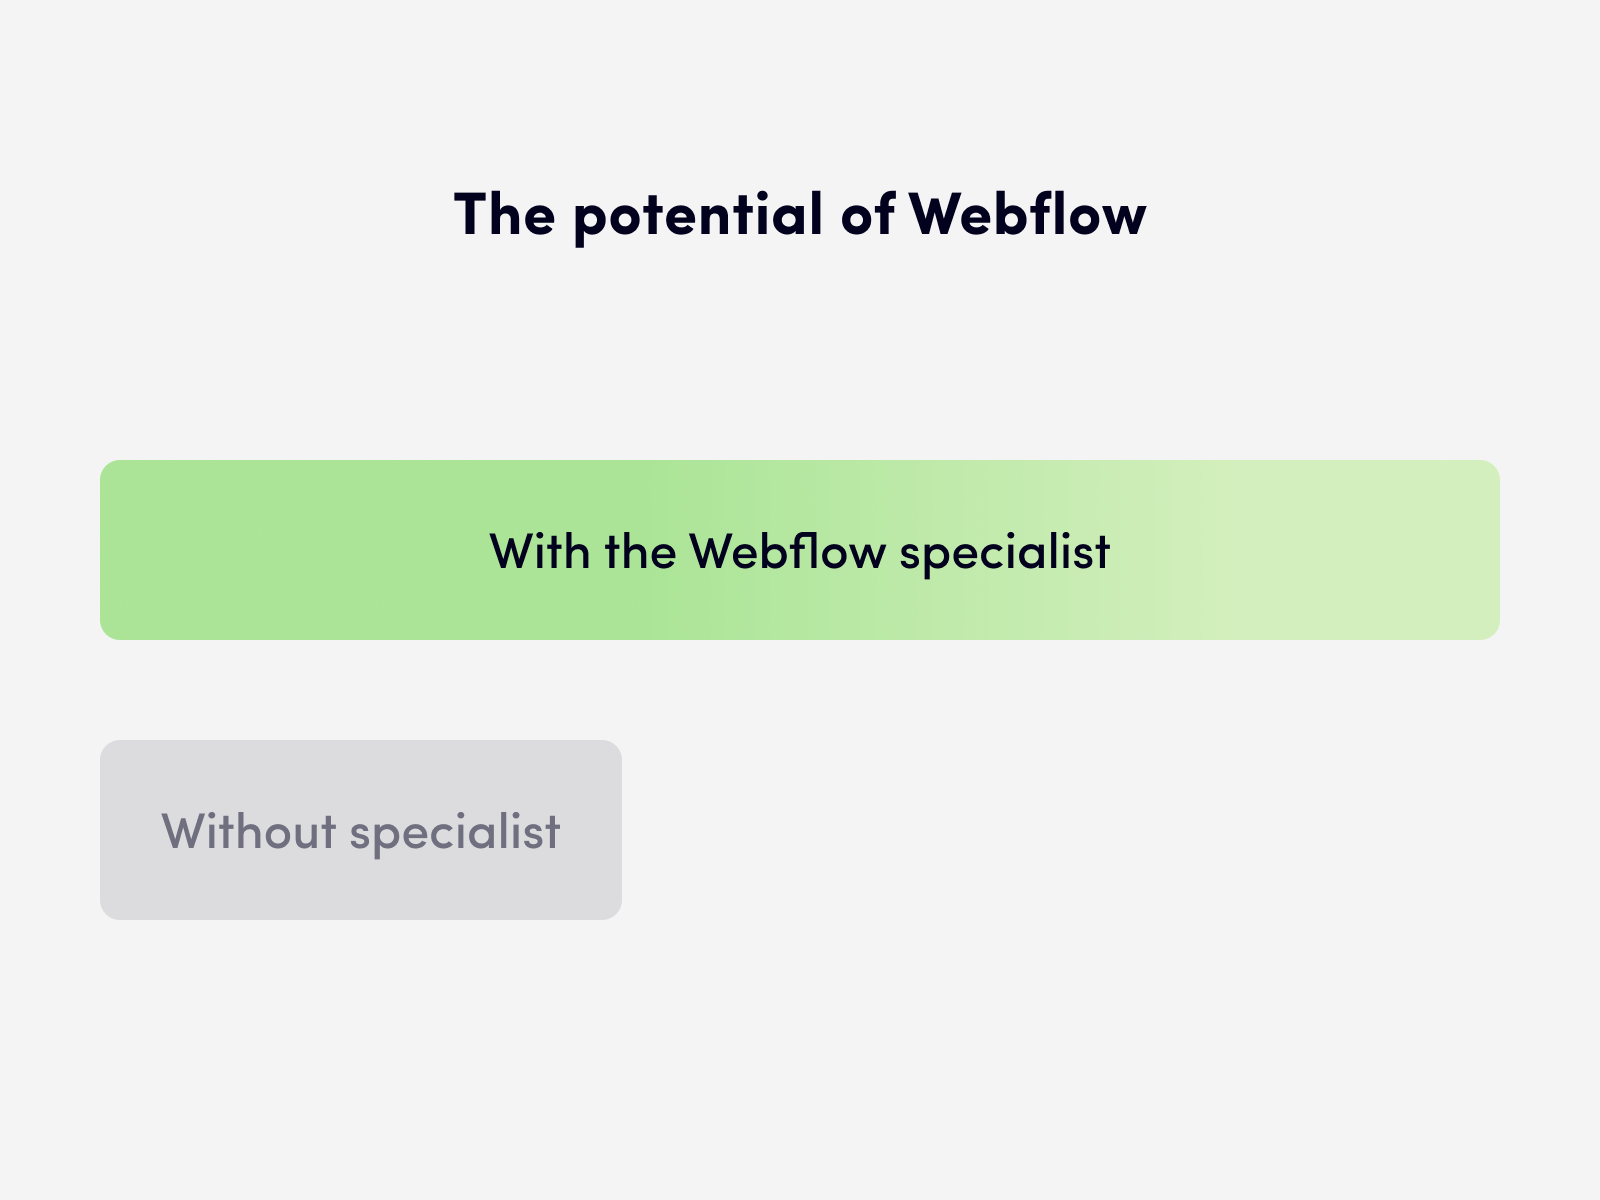 Webflow specialists can help you to utilize the platform’s functionality